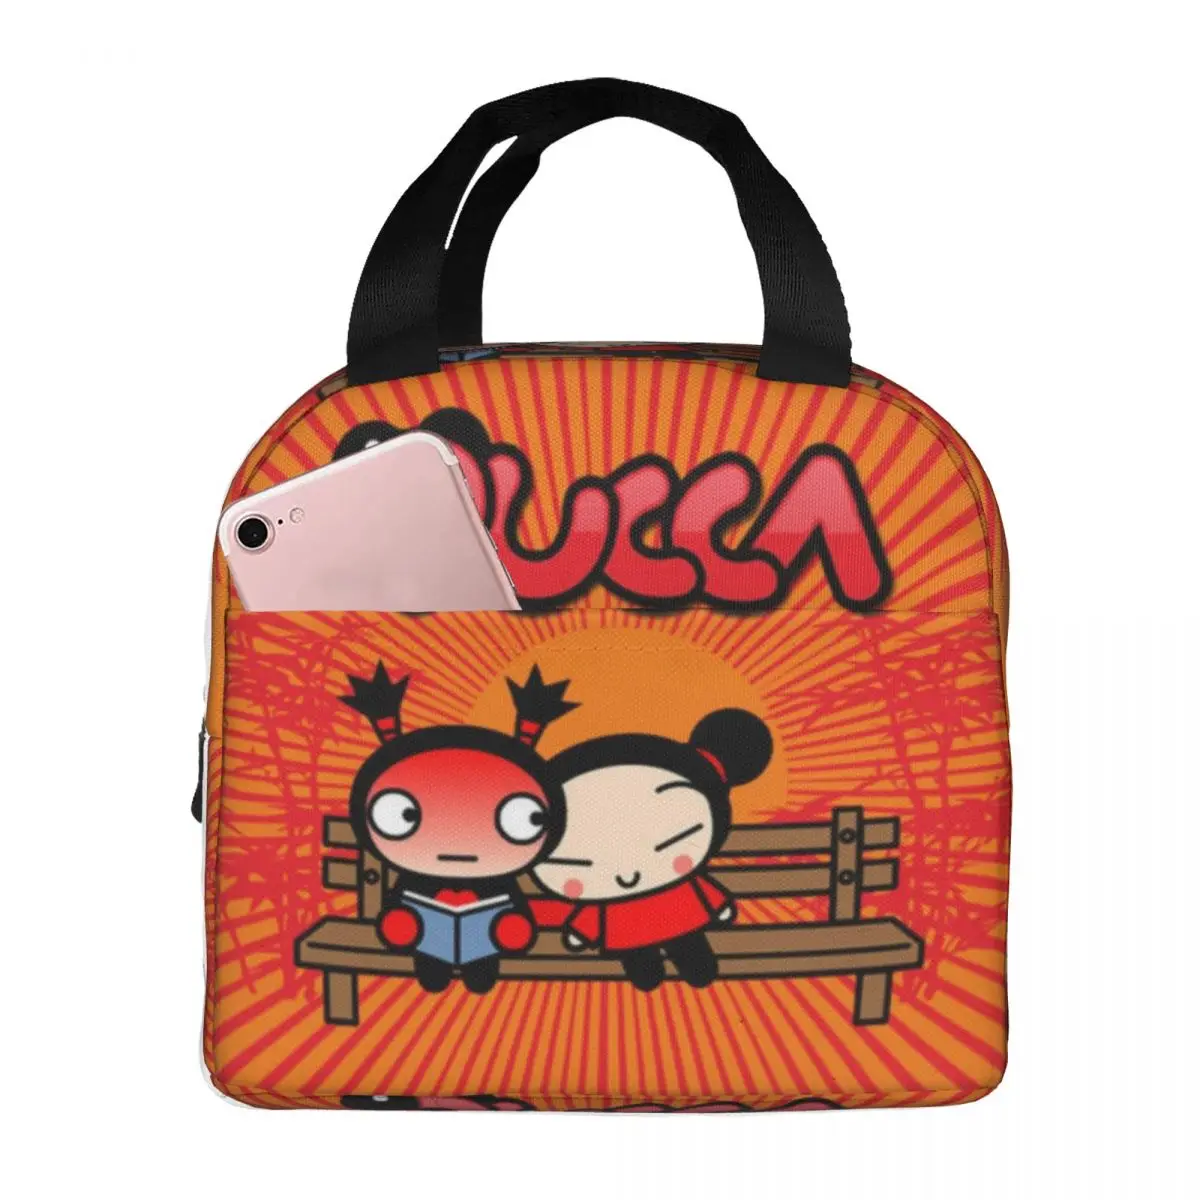 

Cute Pucca Red Thermal Insulated Lunch Bags Reusable Insulated bag cooler Tote Lunch Box Outdoor Teacher